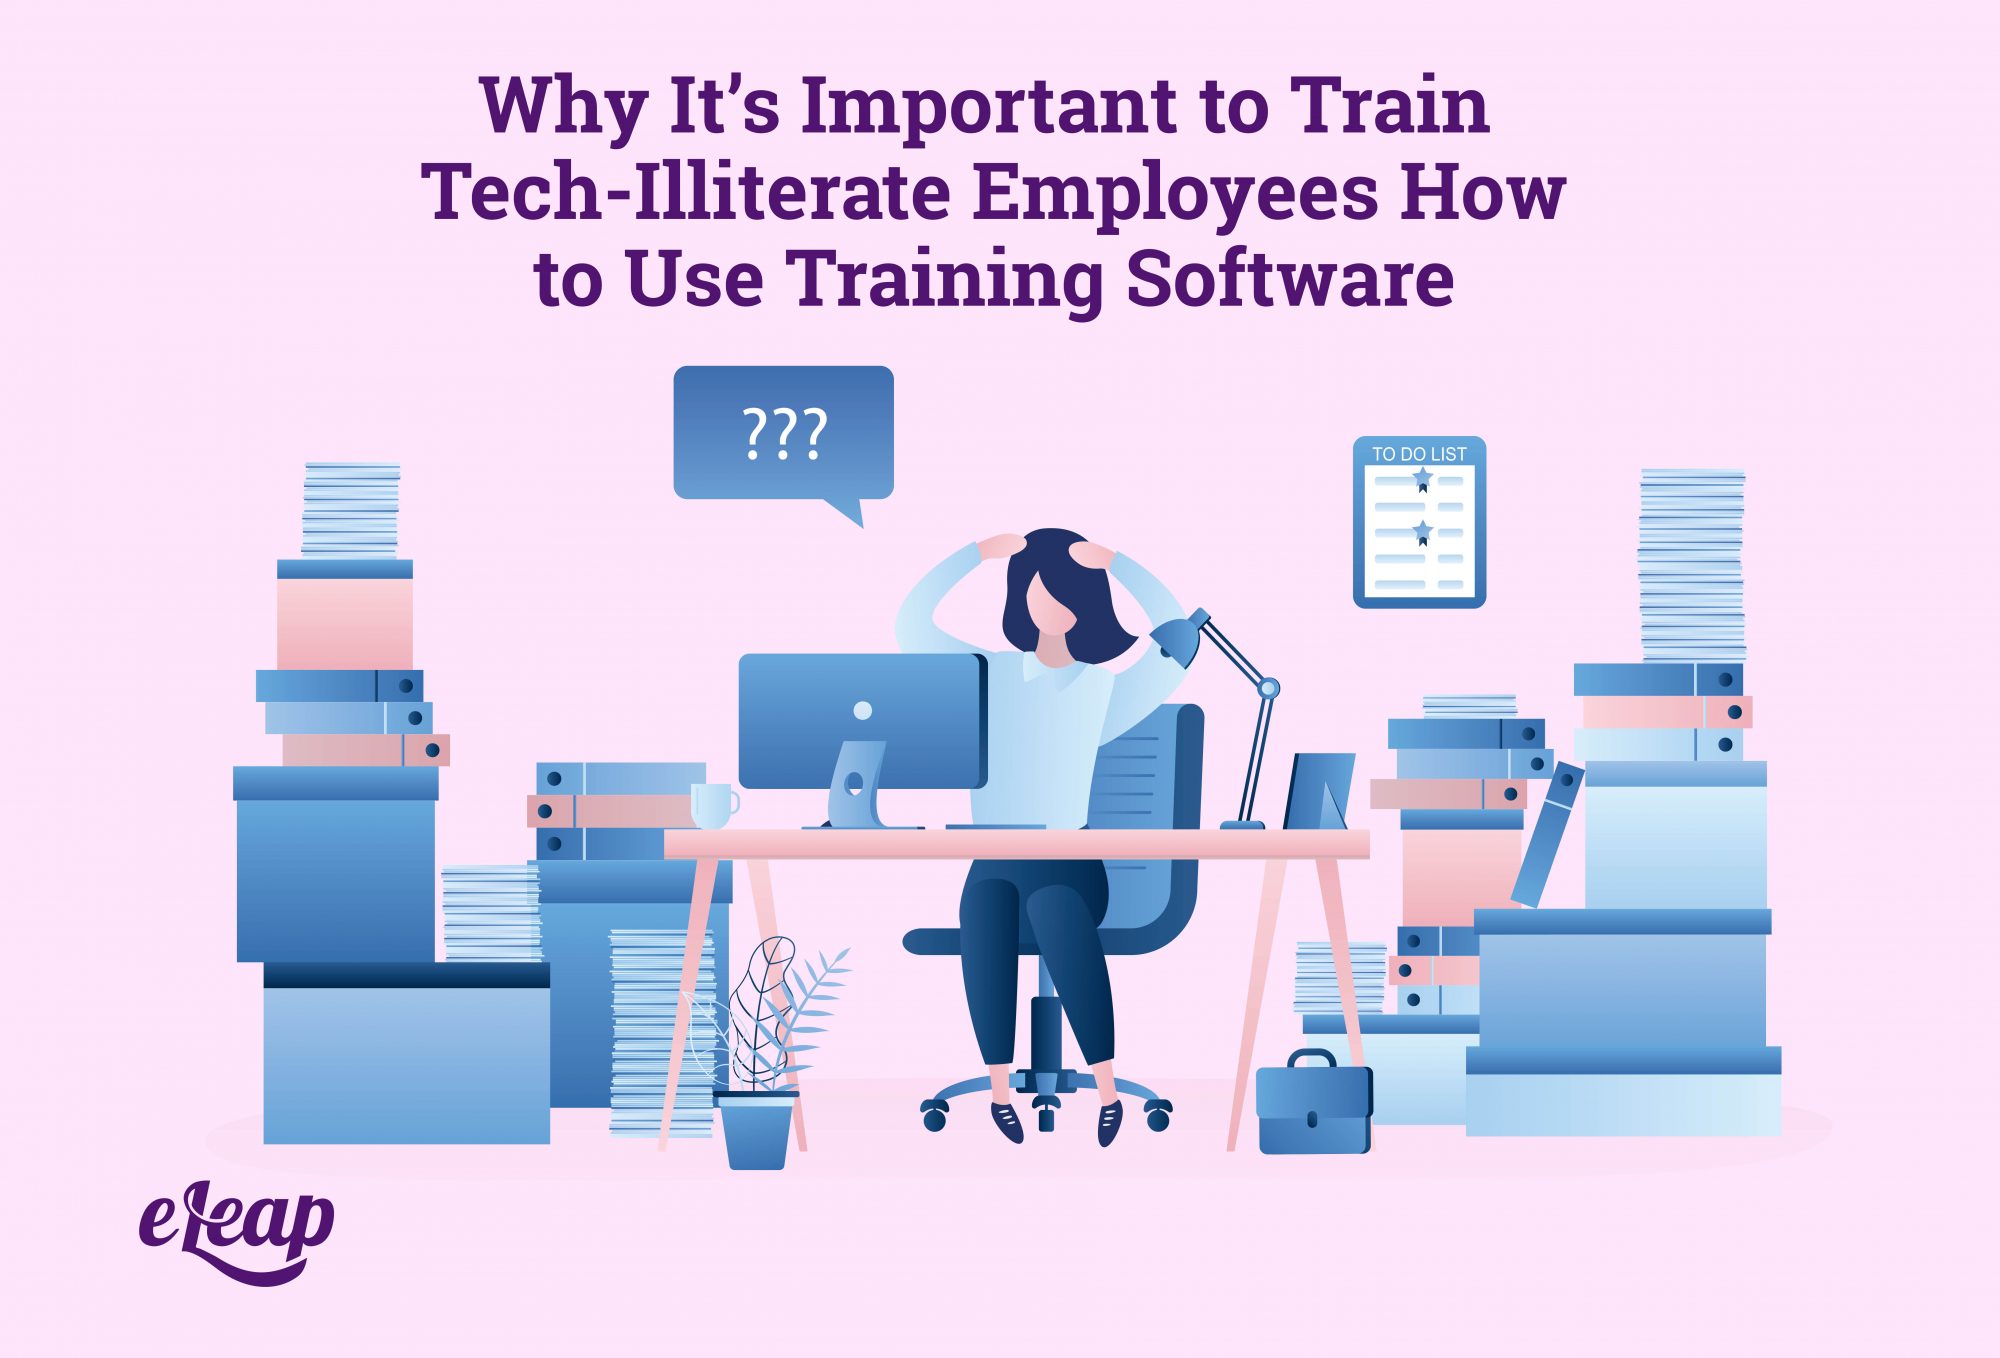 Why It’s Important to Train Tech-Illiterate Employees How to Use Training Software